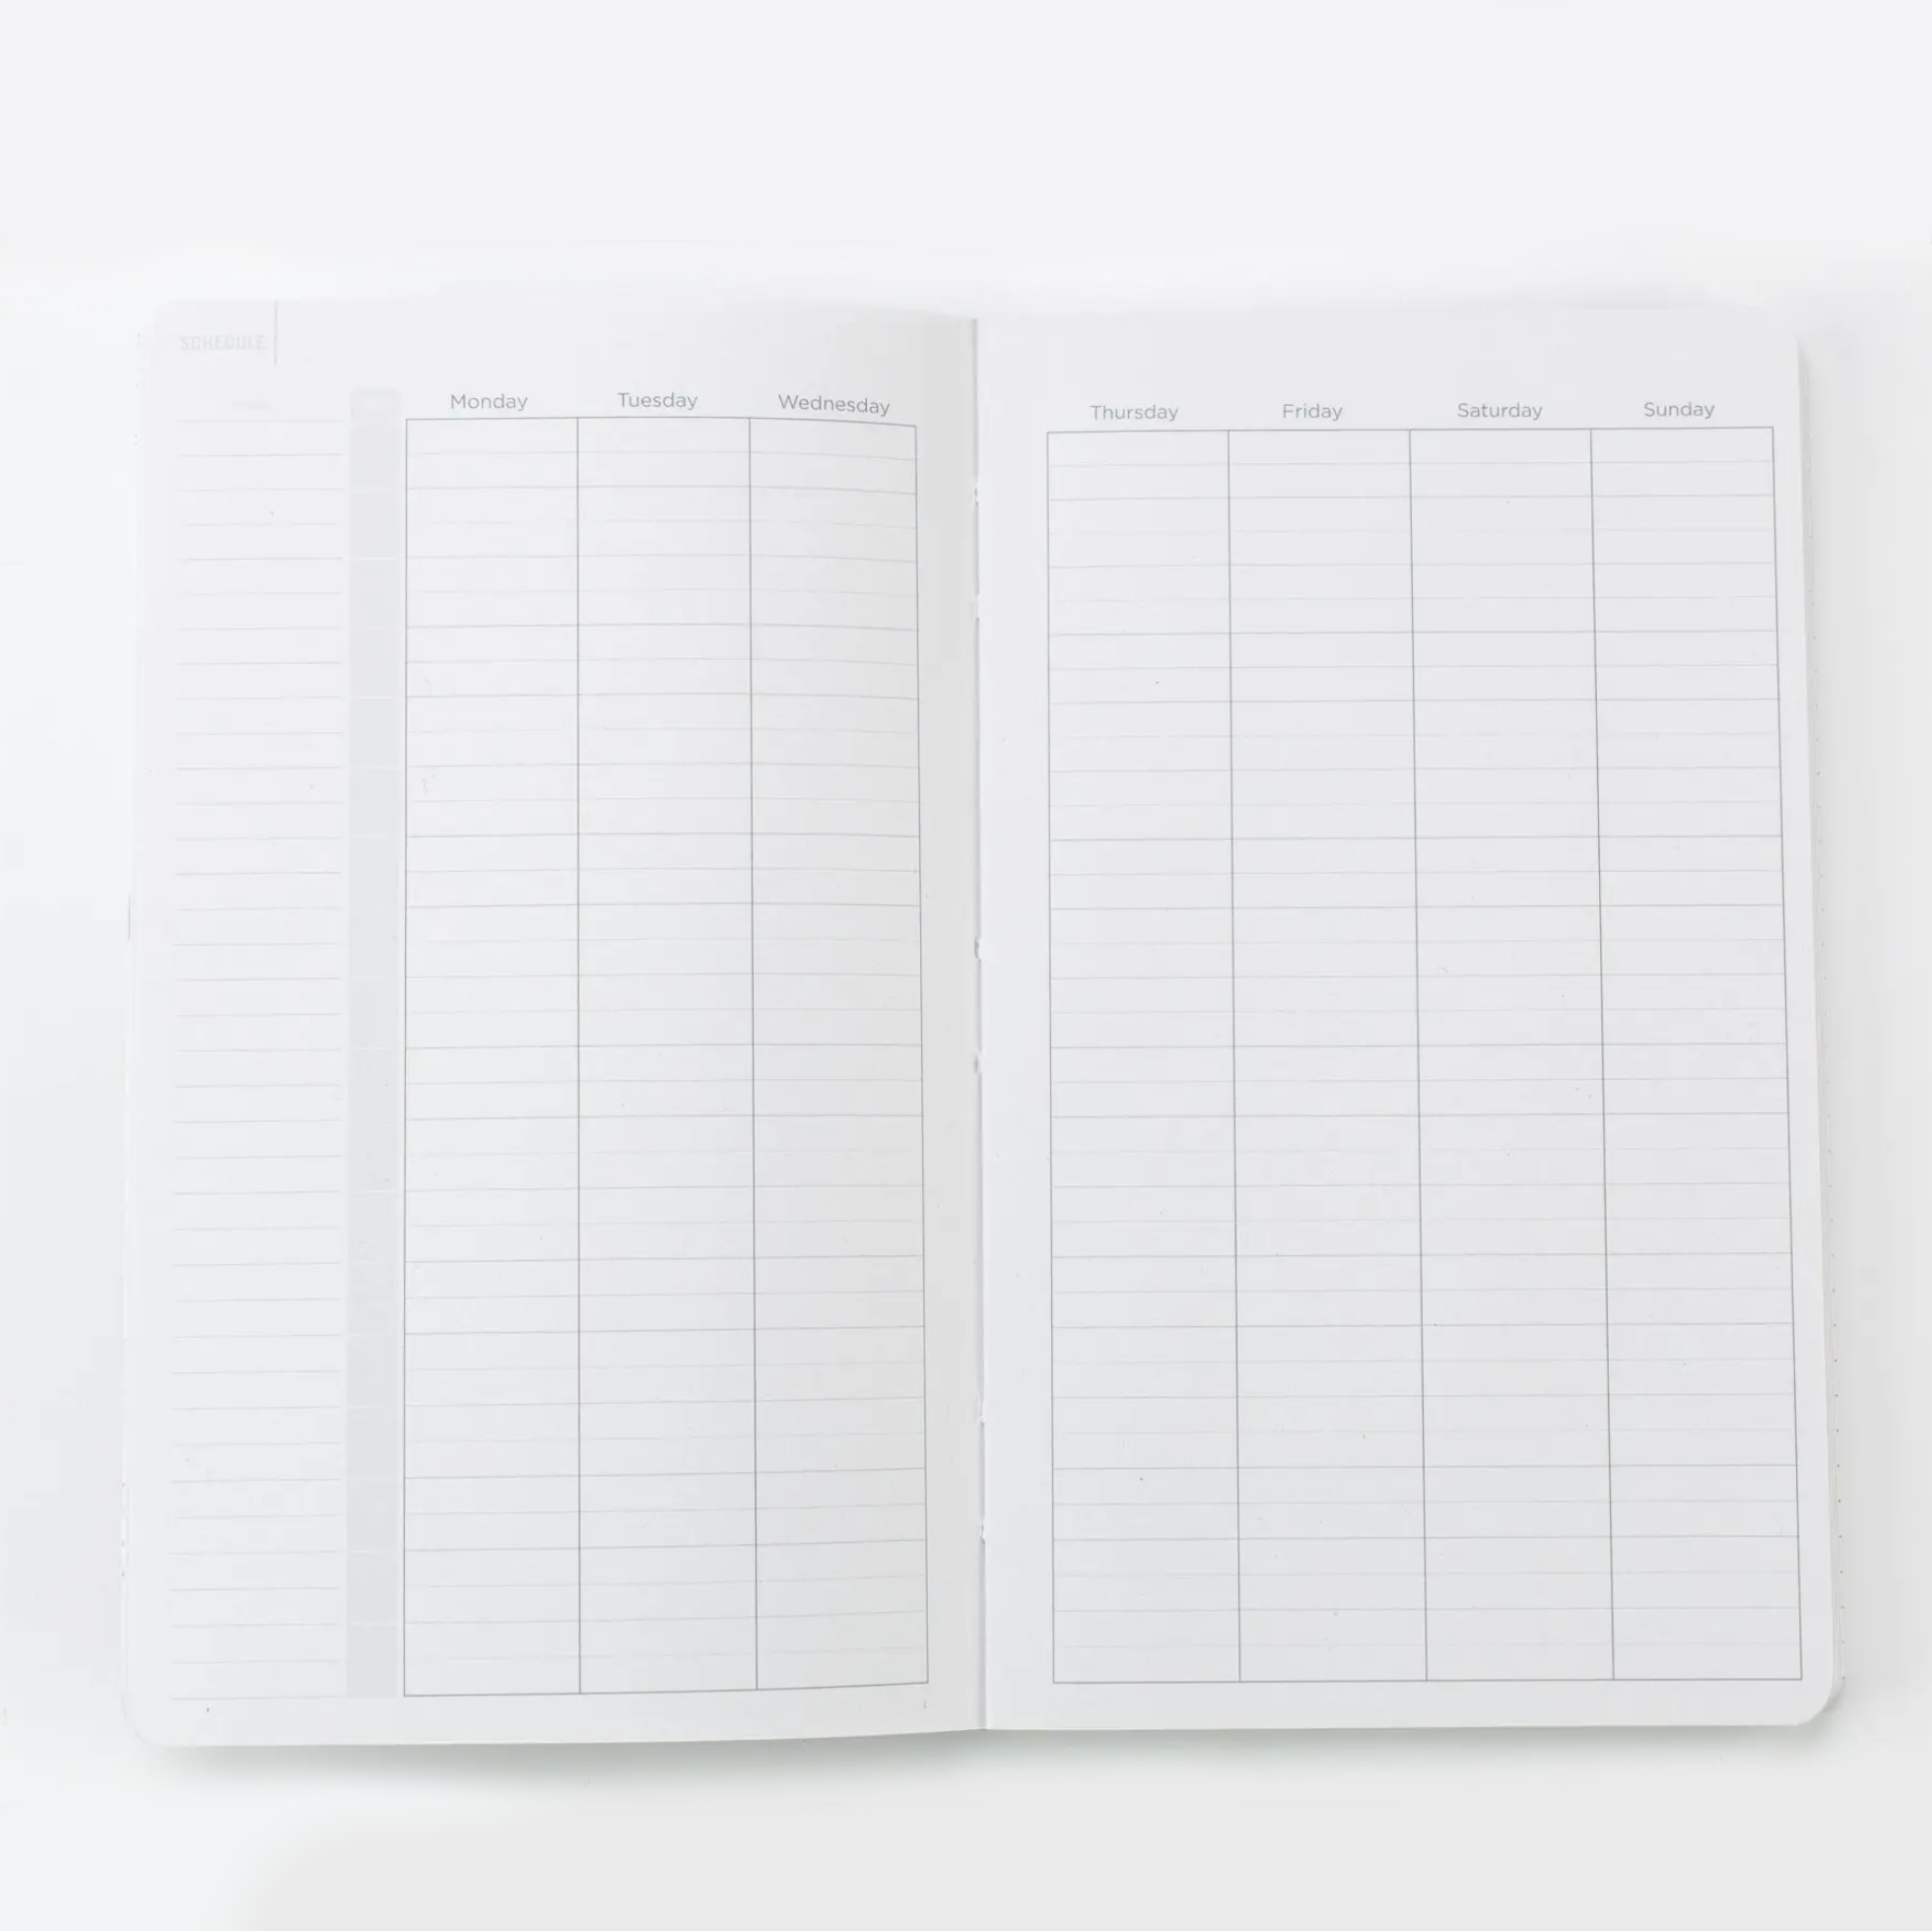 Yearly Planner • Astronomy